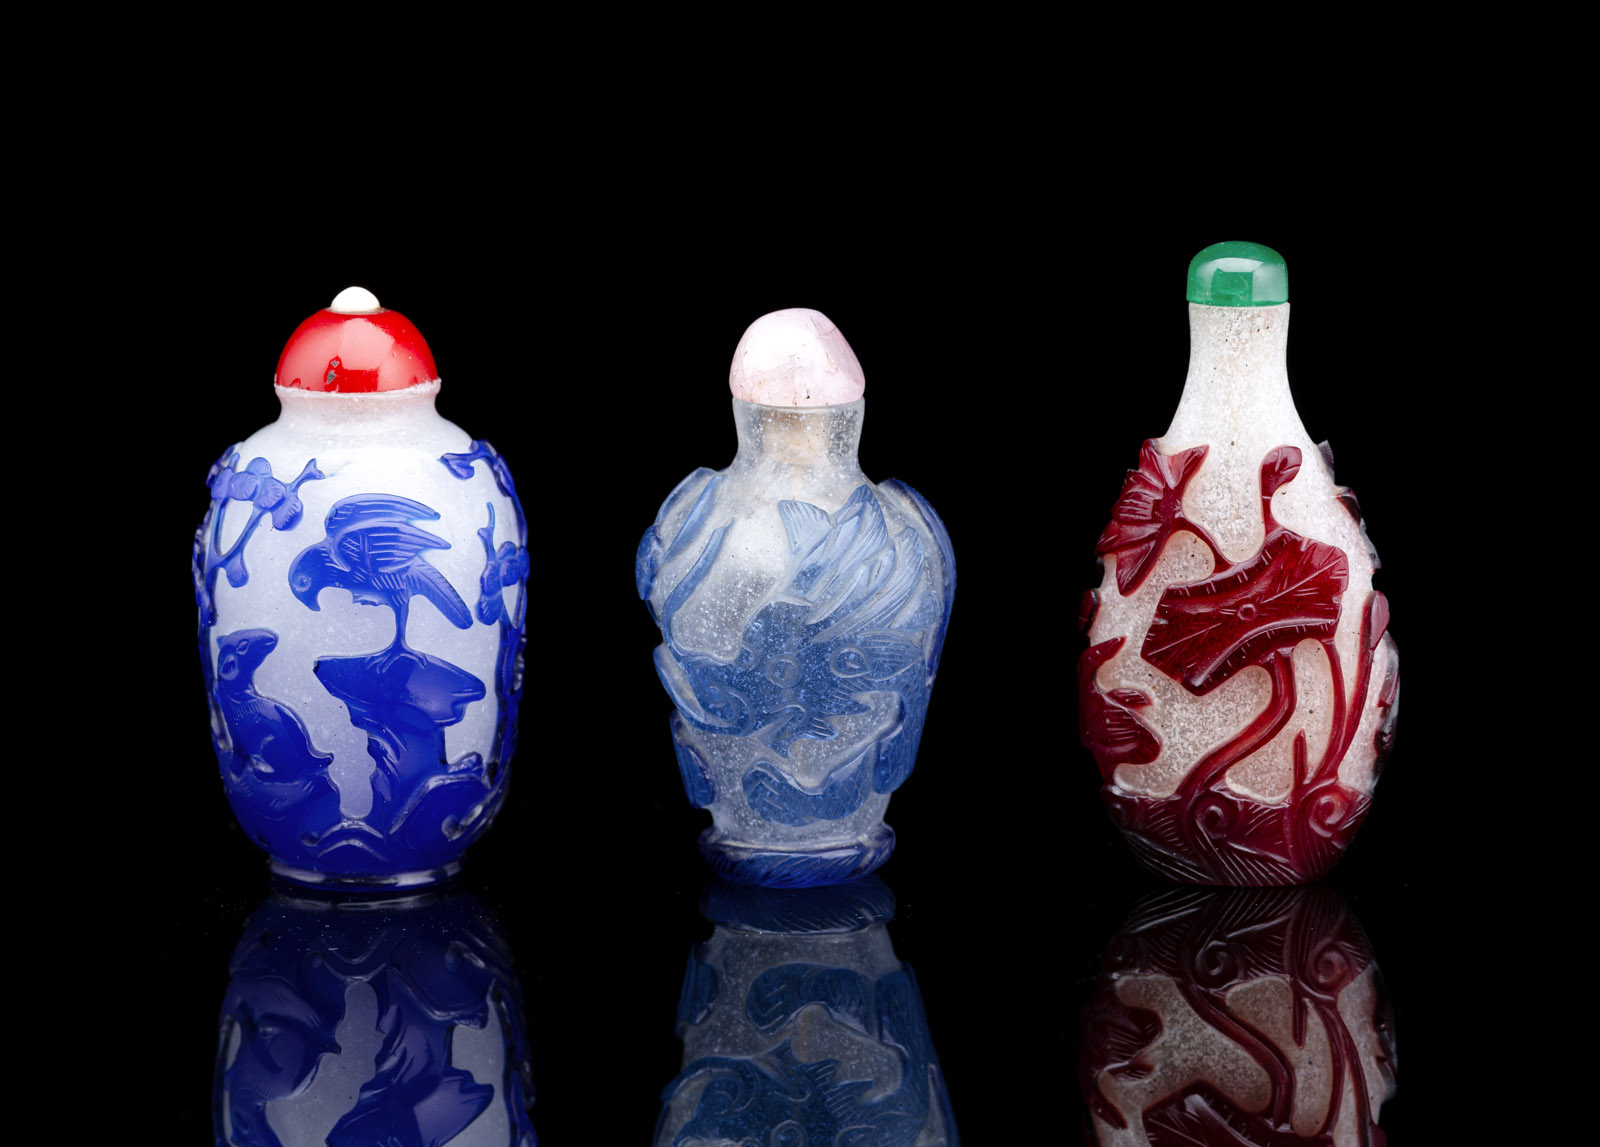 <b>A GROUP OF THREE OVERLAY-DECORATED BEIJING GLAS SNUFFBOTTLES</b>